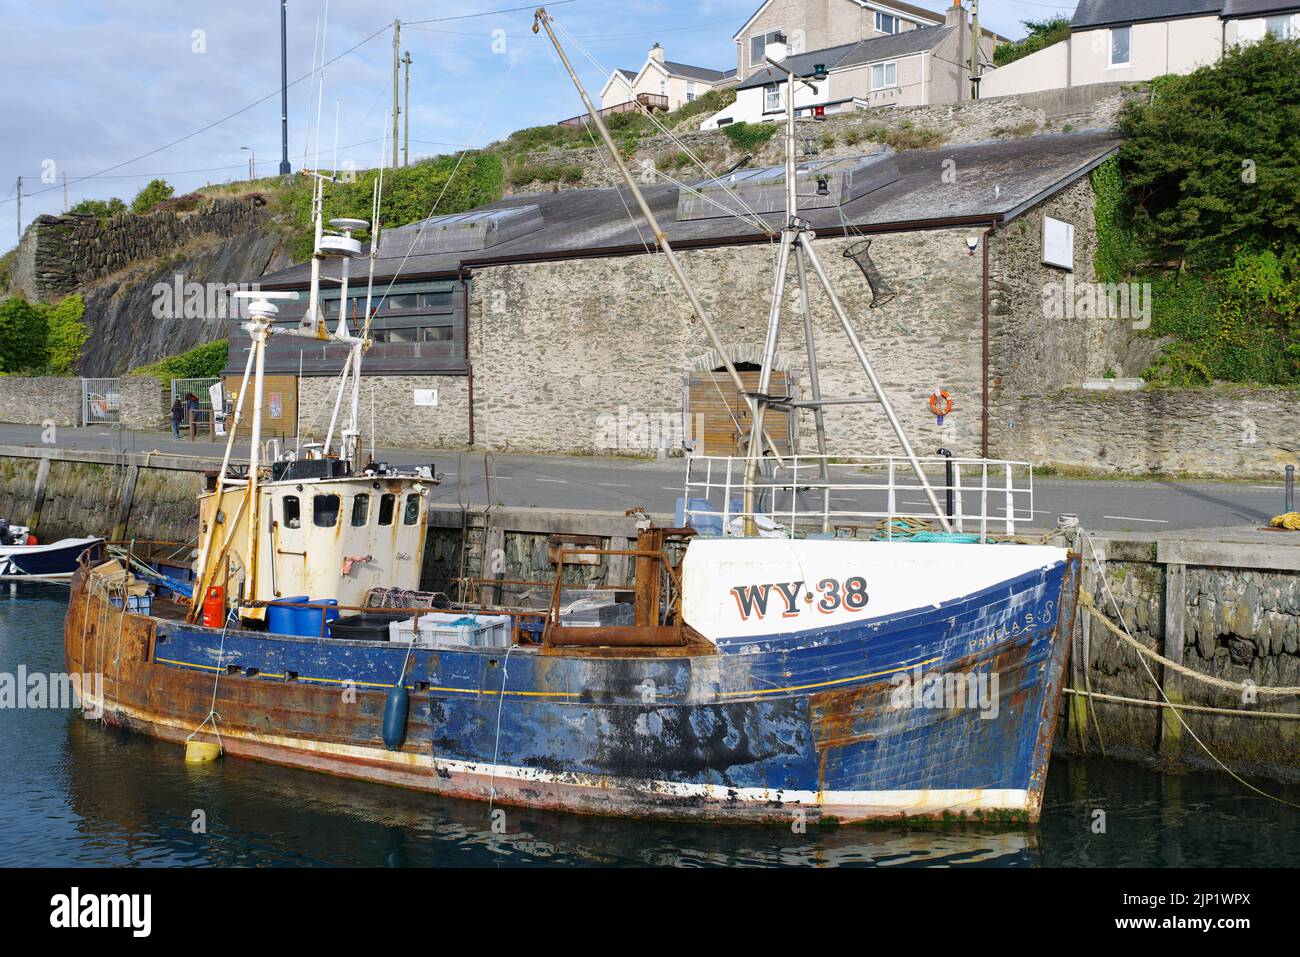 Whitby Fishing Boat, Pamela S WY-38 at Amlwch Harbour, Anglesey, North Wales, Stock Photo